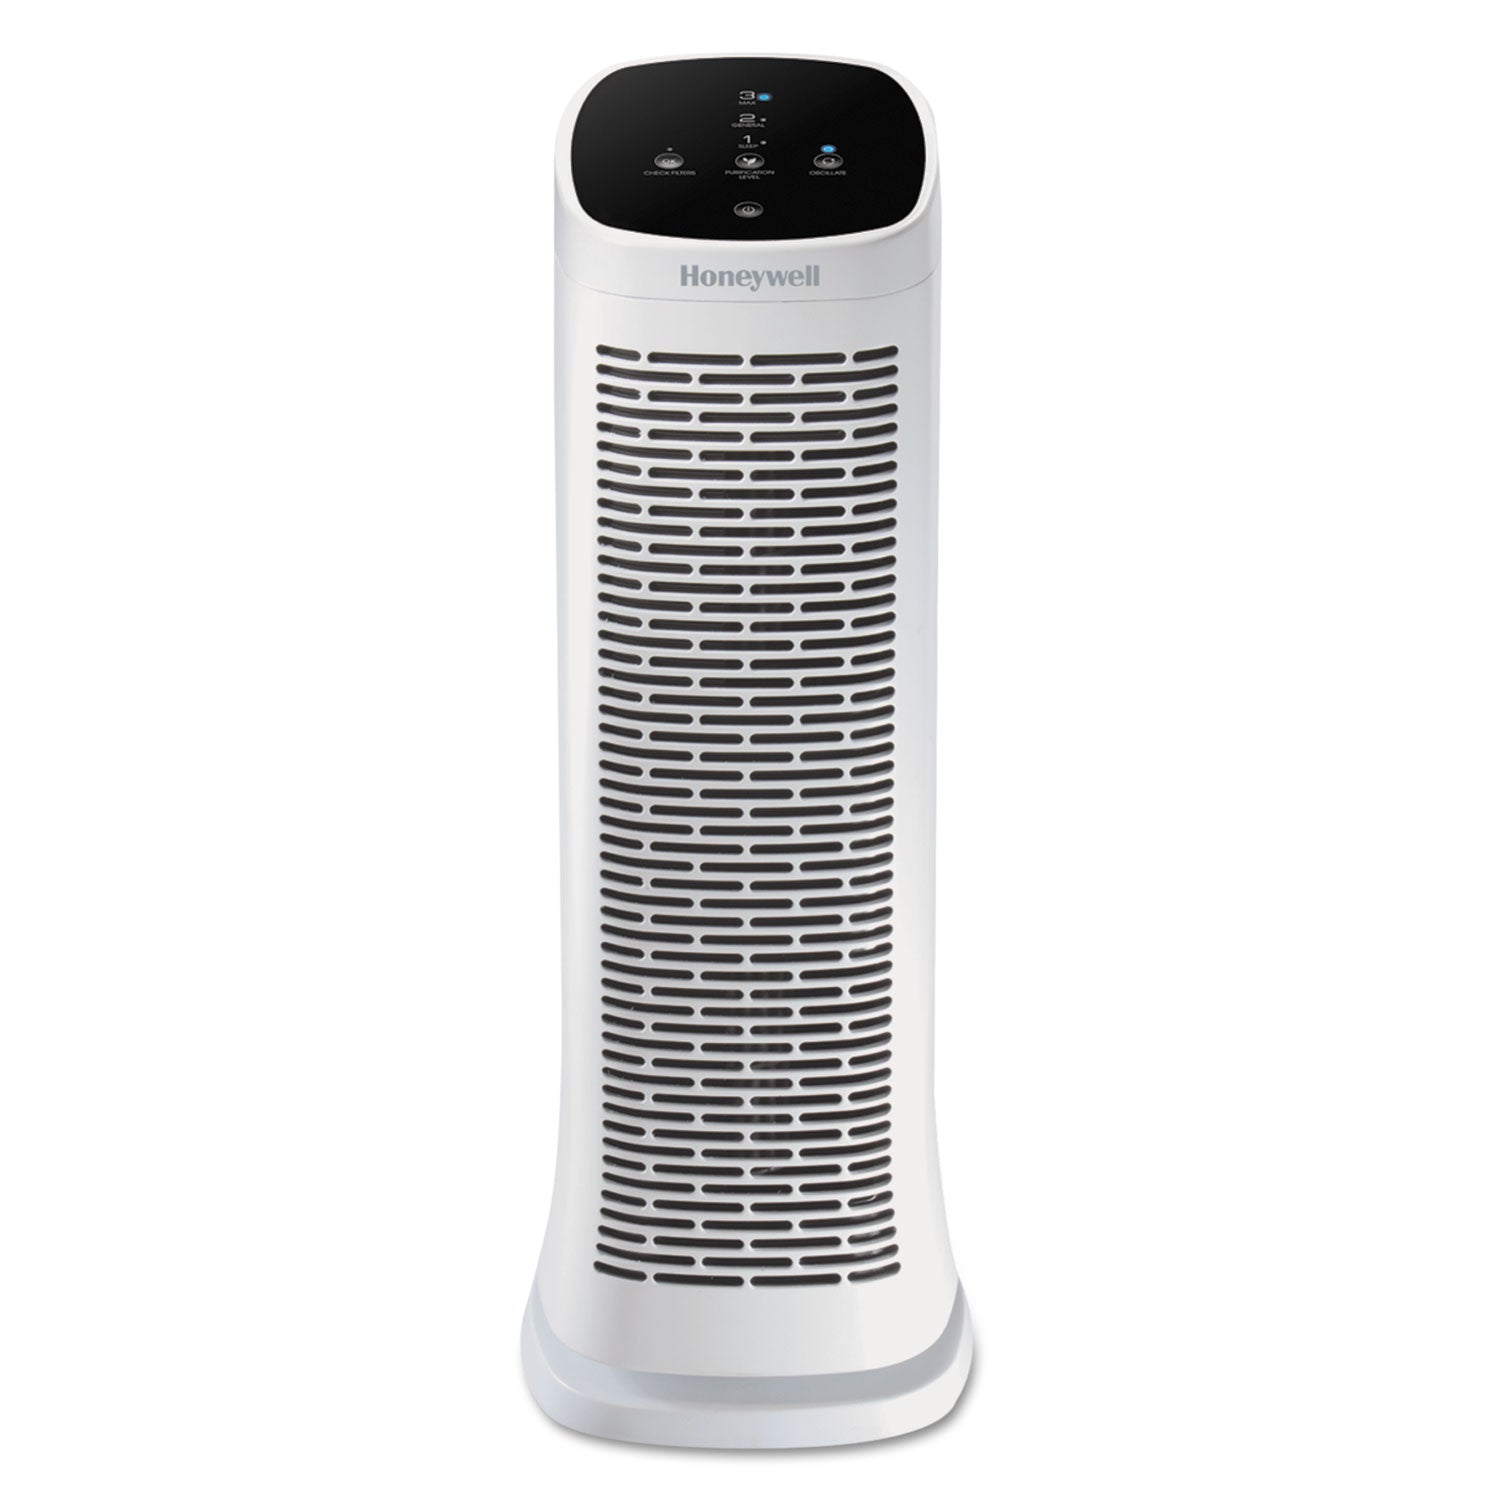 air-genius-3-oscillating-tower-air-purifier-with-permanent-washable-filter-225-sq-ft-room-capacity-white_hwlhfd300v1 - 1